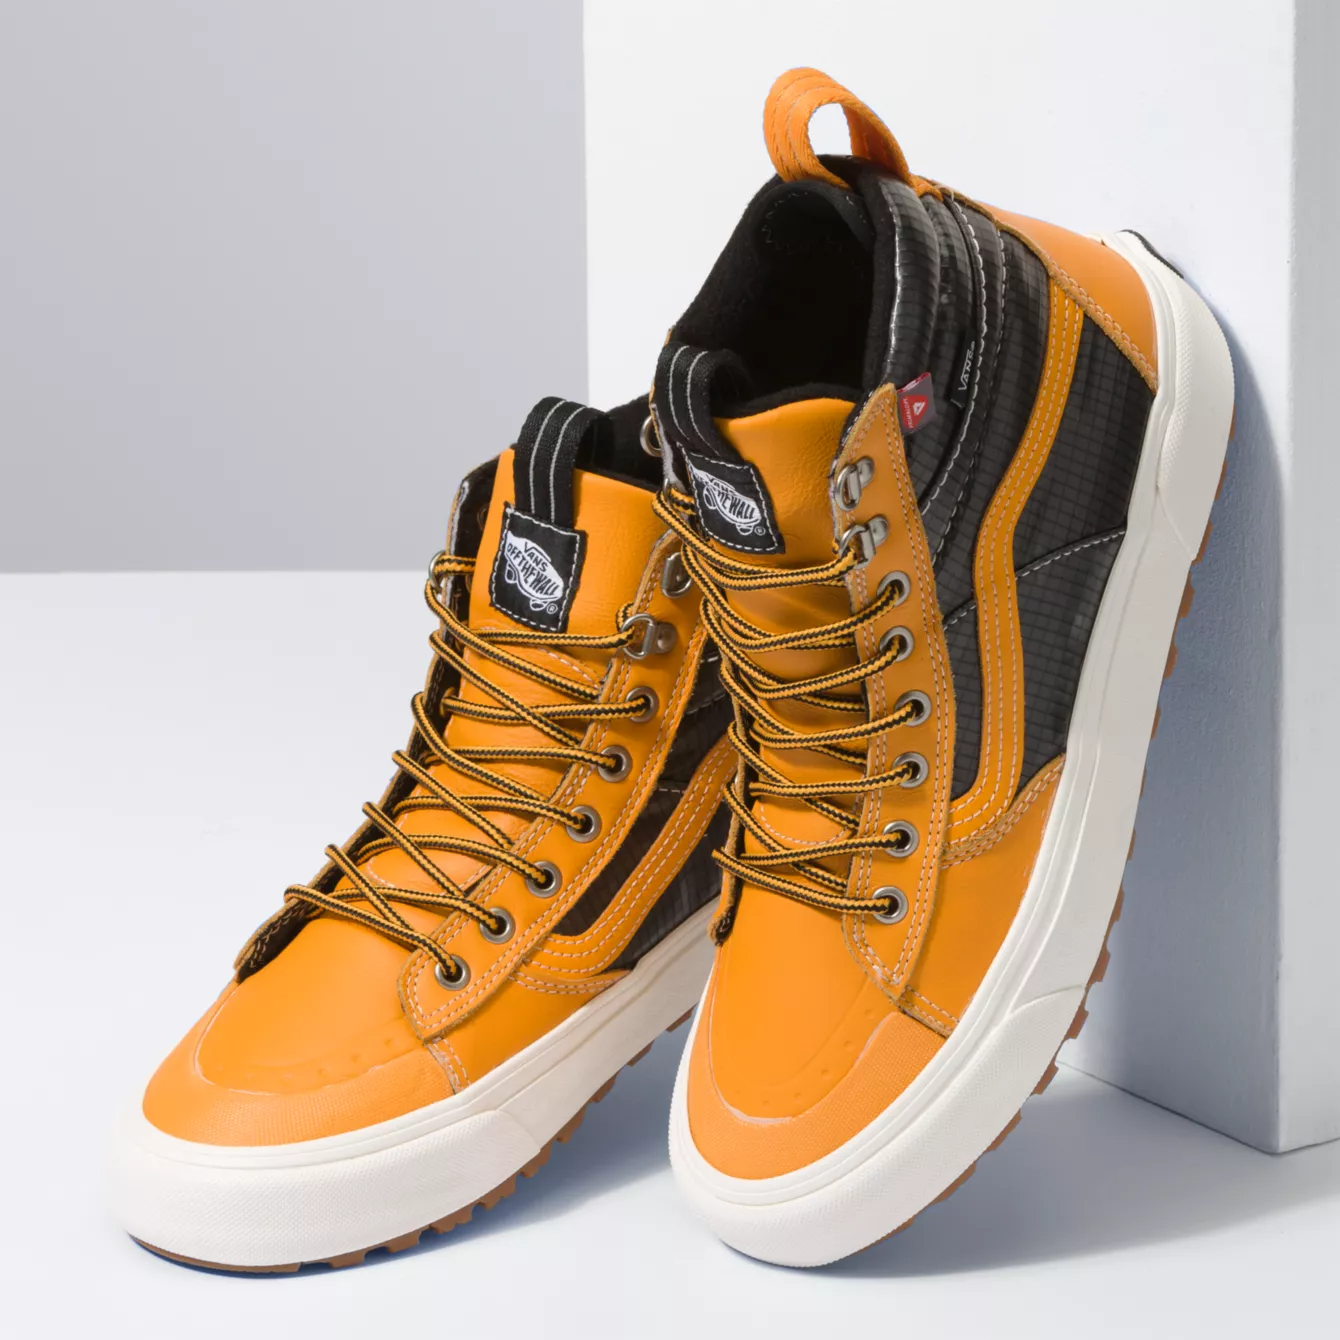 Vans Now Makes Some of Boots InsideHook Best Sneaker Around - the